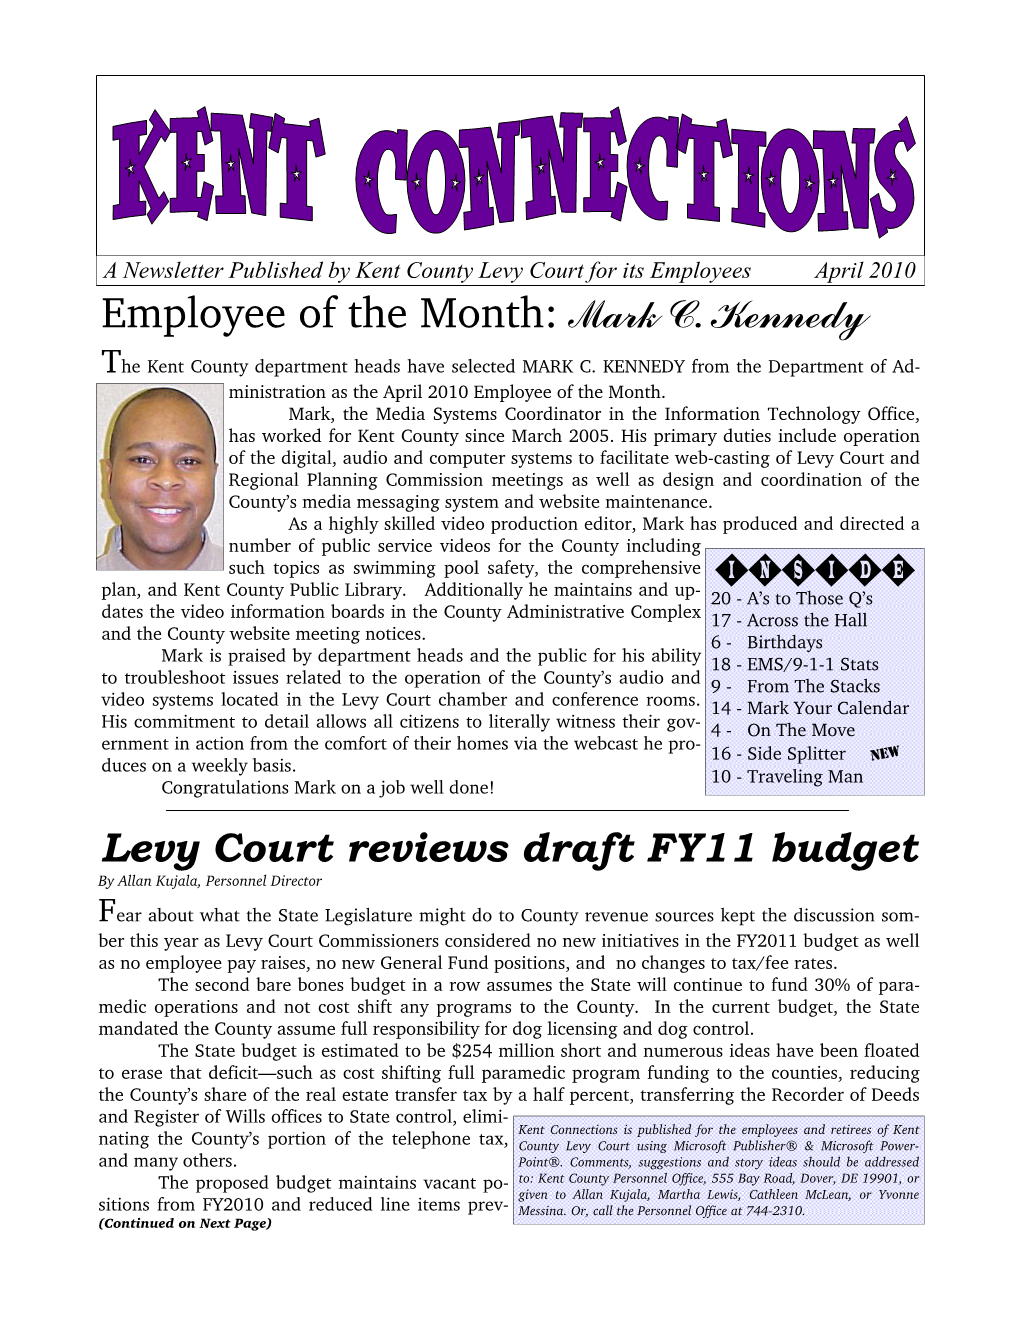 Employee of the Month: Mark C. Kennedy the Kent County Department Heads Have Selected MARK C